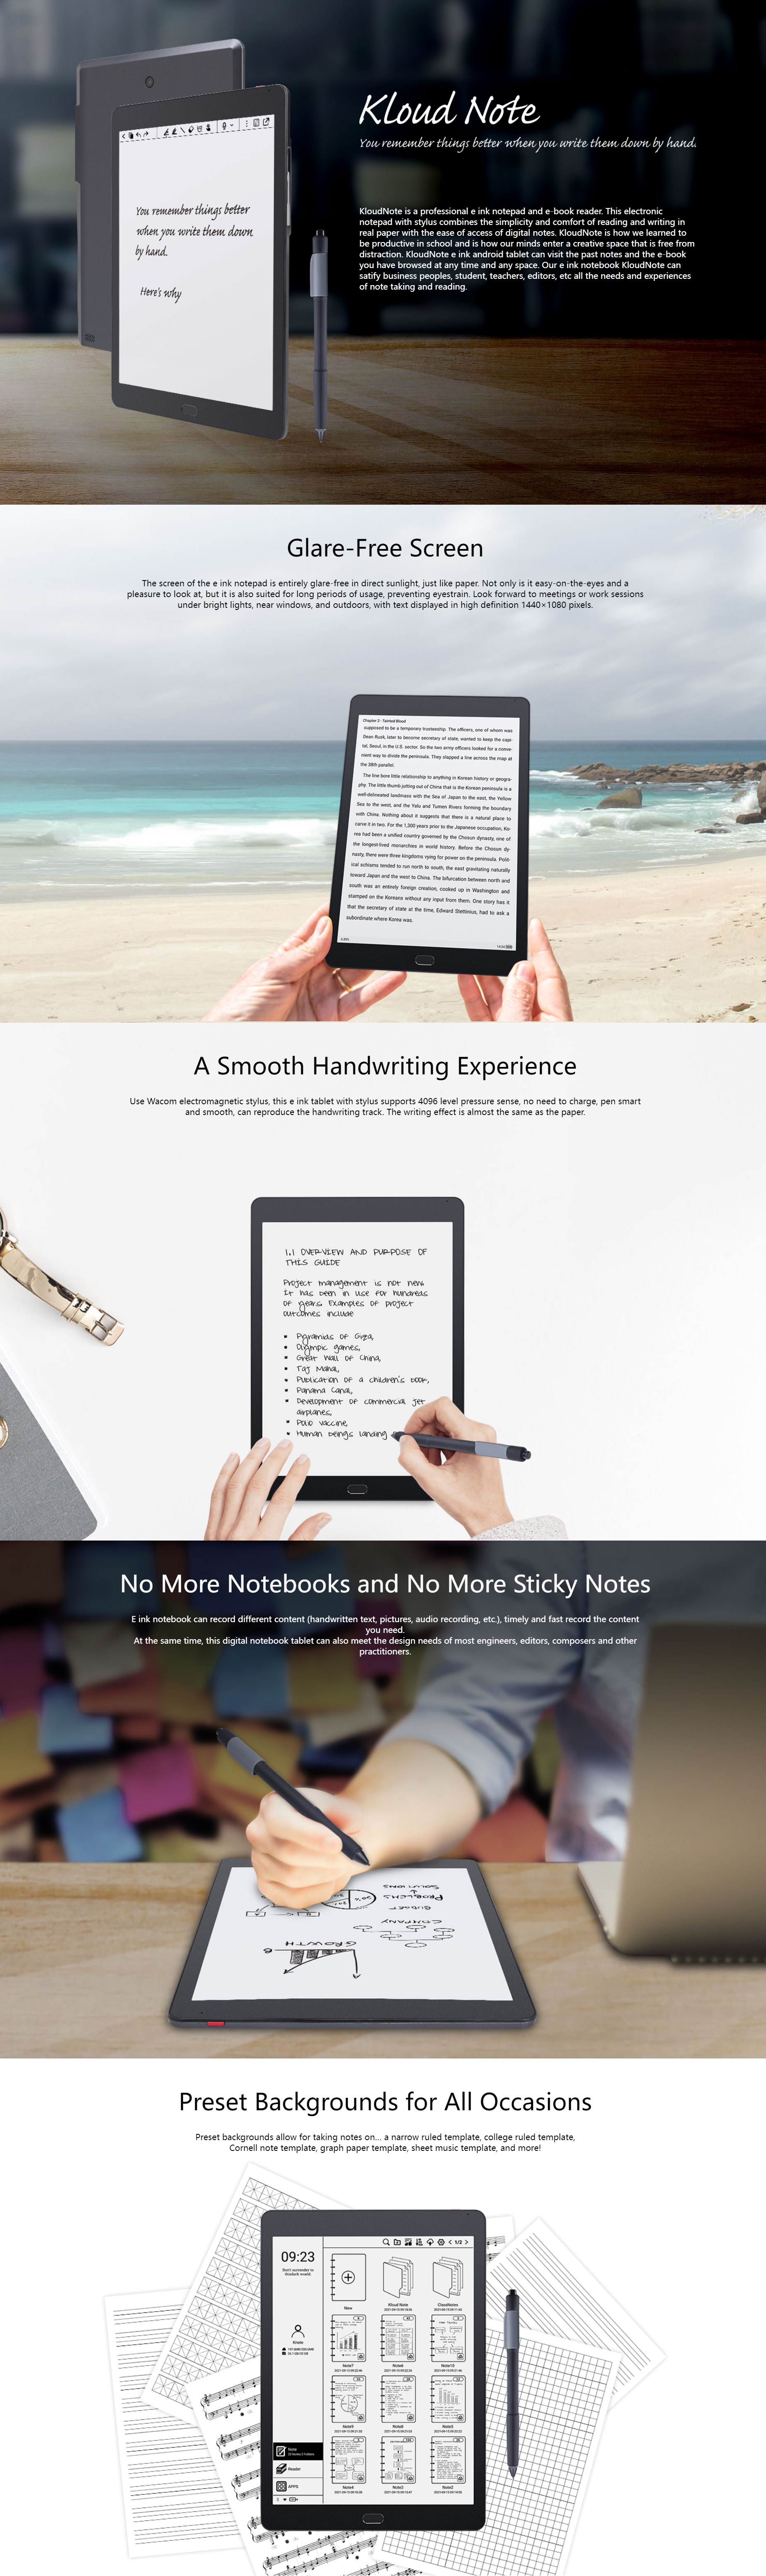 E-Ink tablet for Reading & Writing (KloudNote)